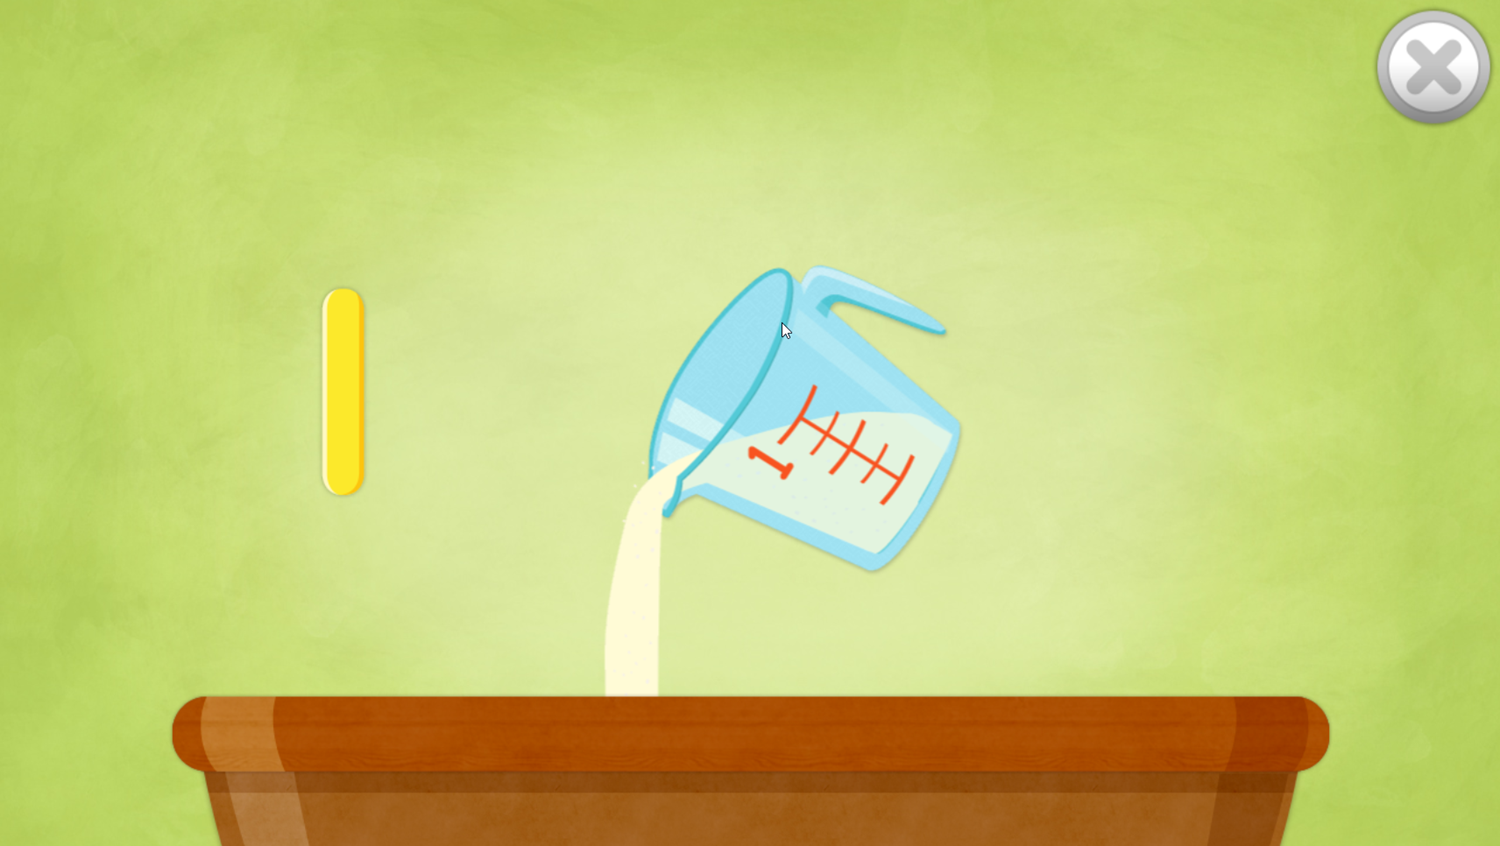 Sesame Street Cooking With Cookie Game Pour Flour Screenshot.